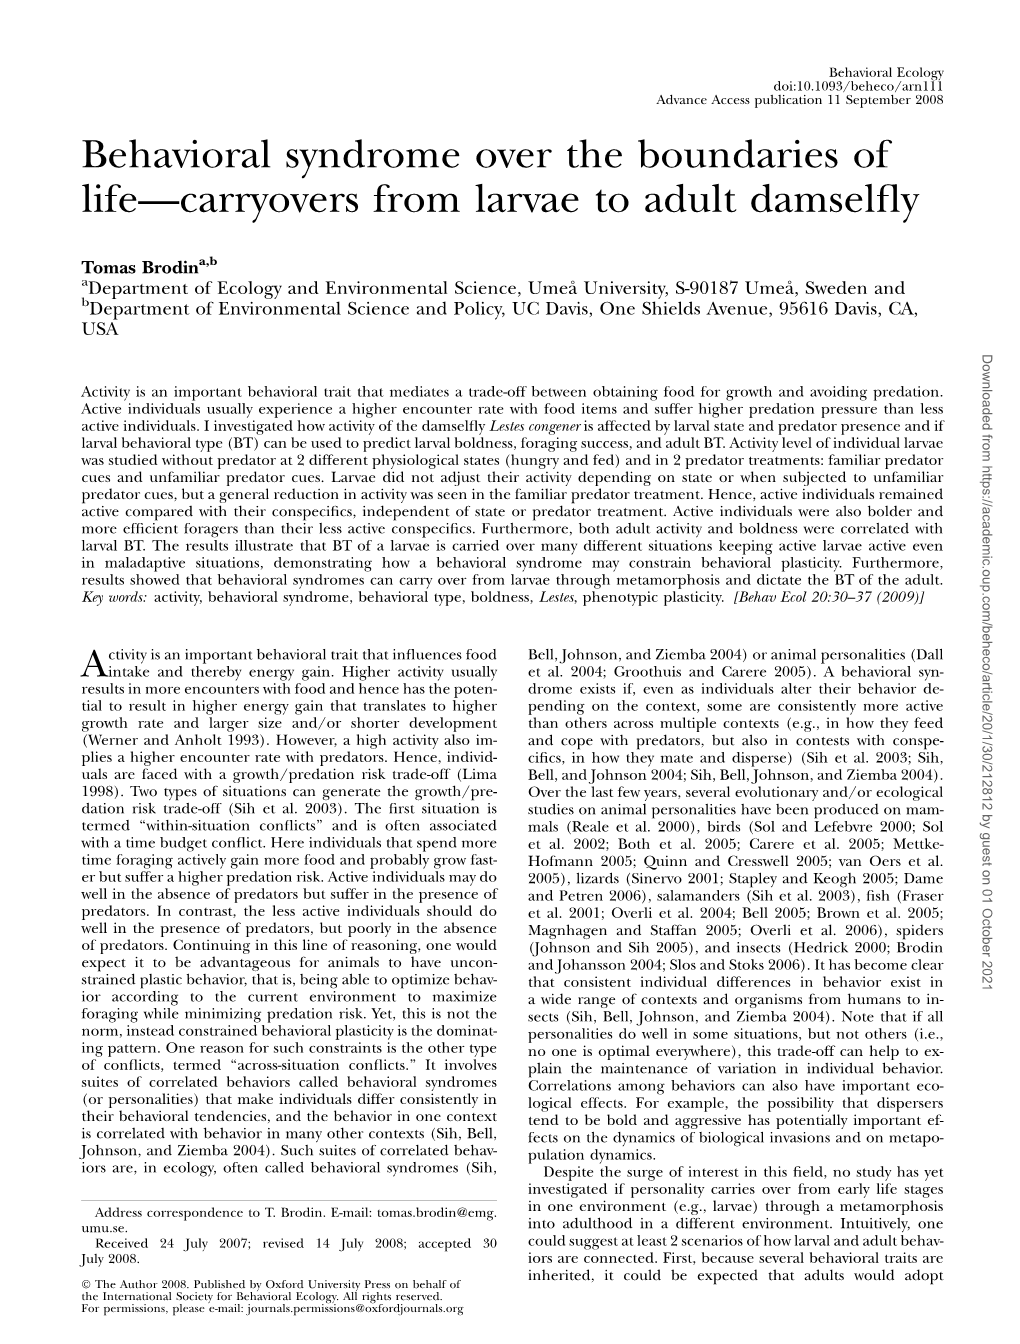 Behavioral Syndrome Over the Boundaries of Life—Carryovers from Larvae to Adult Damselfly